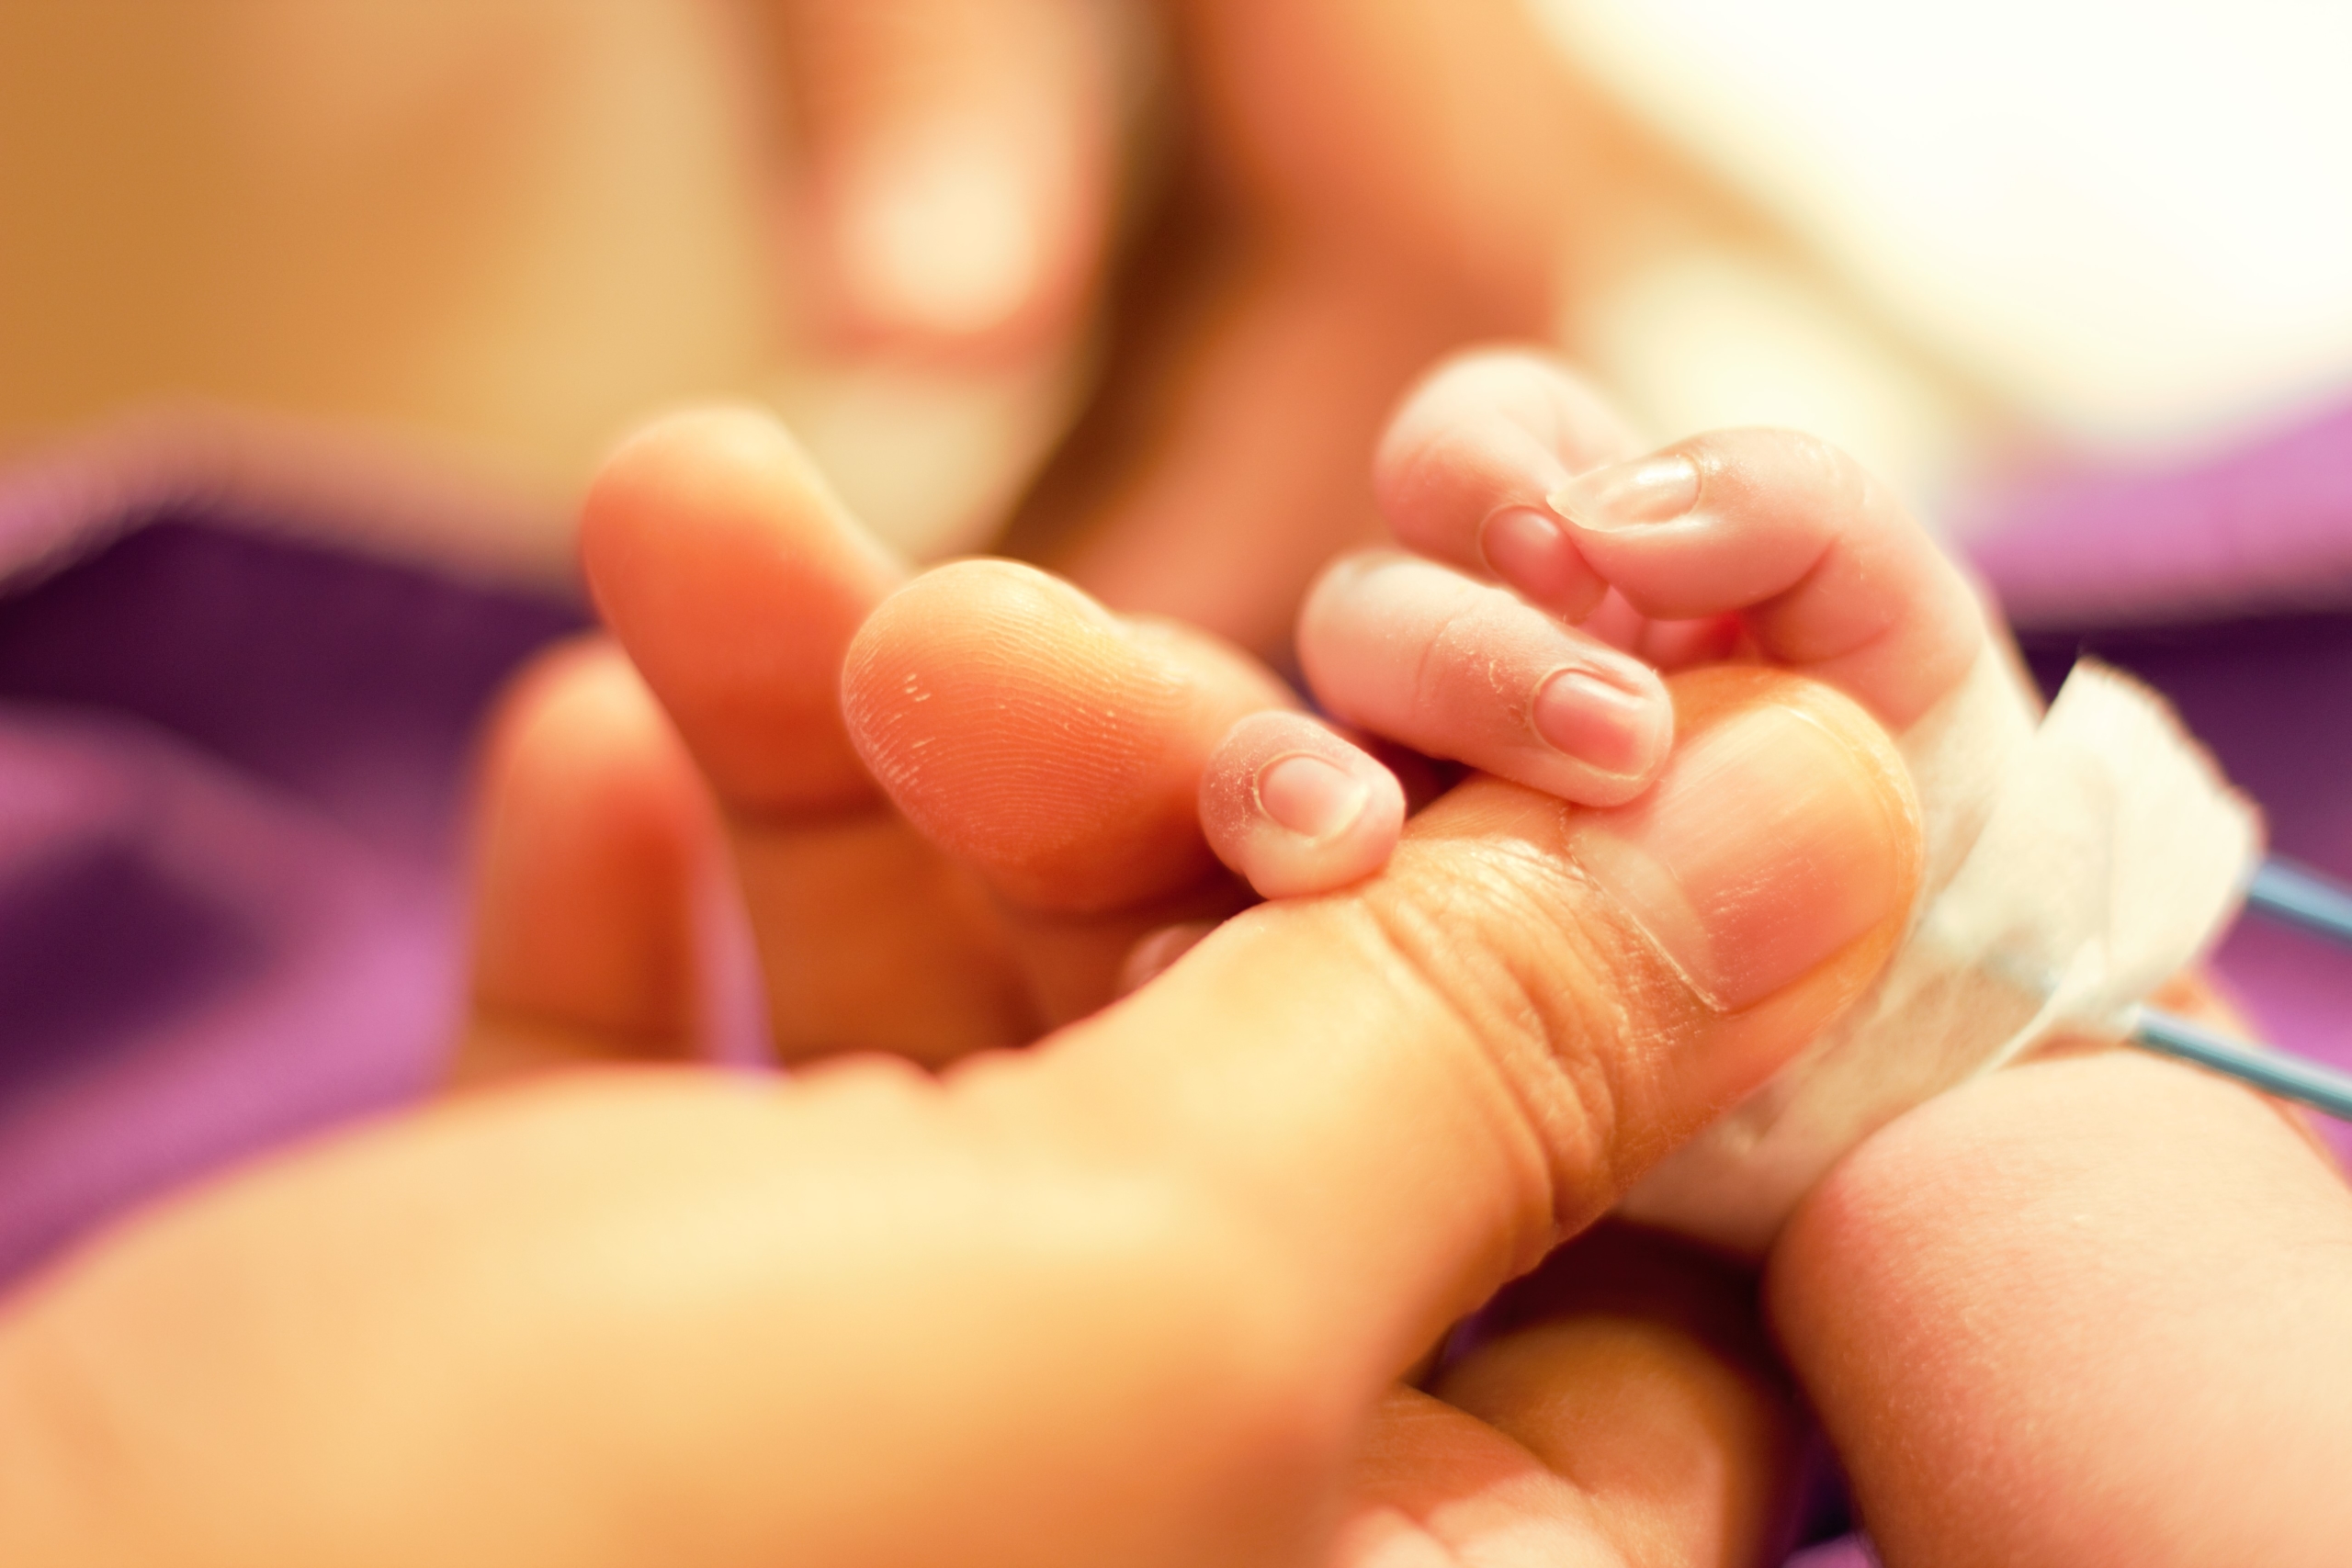 Occupational therapists in the neonatal ICU approach the work from both neuroprotective and rehabilitative perspectives.